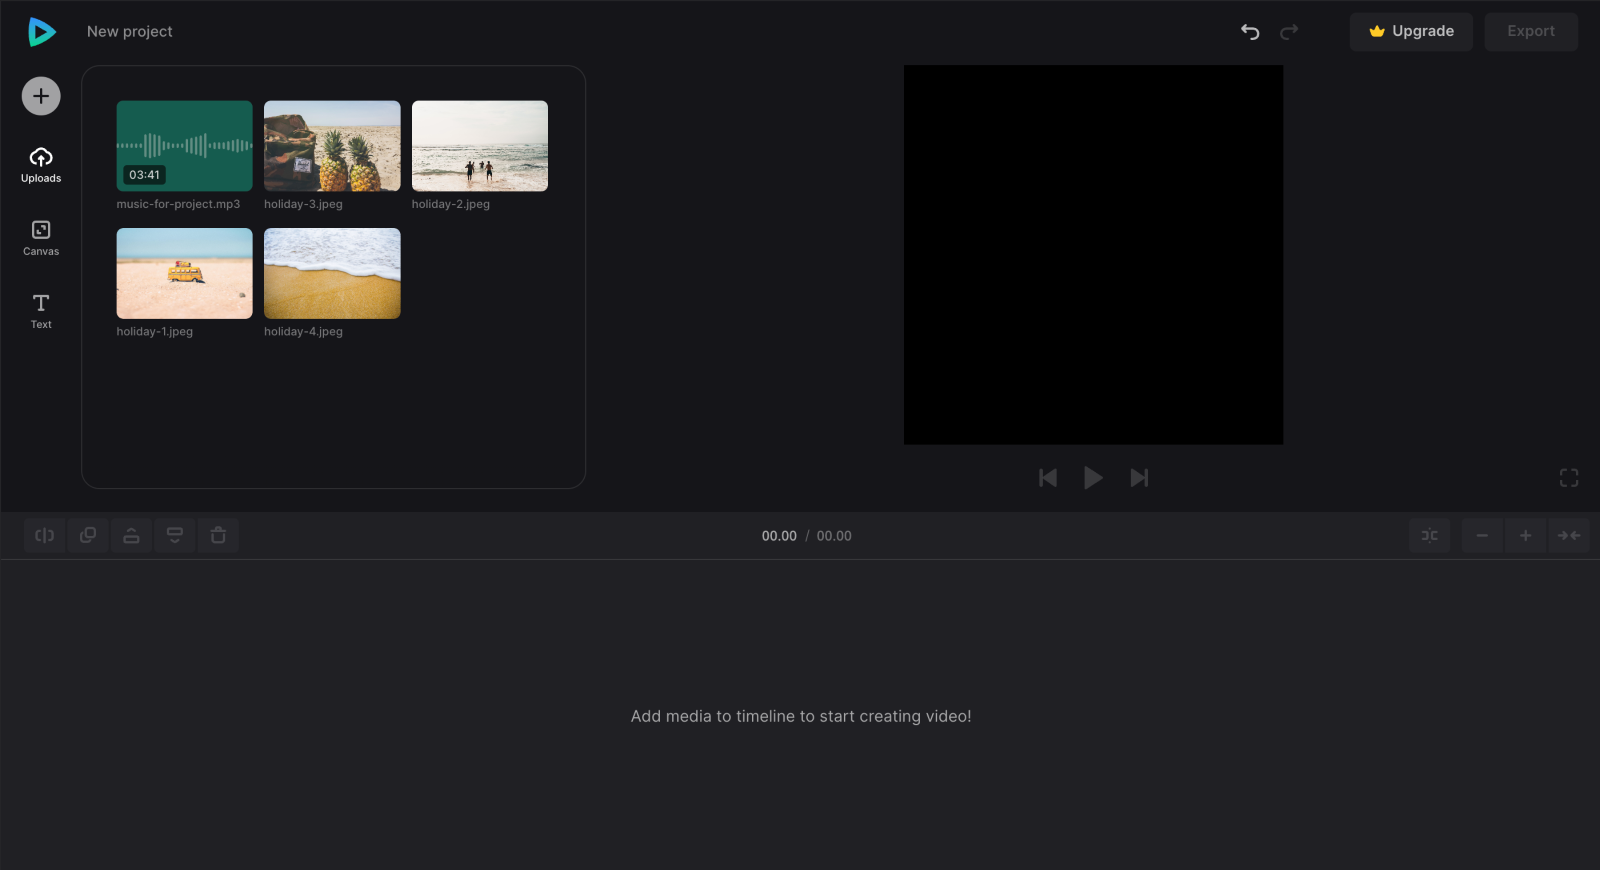  Files in video editor to make photo slideshow with music